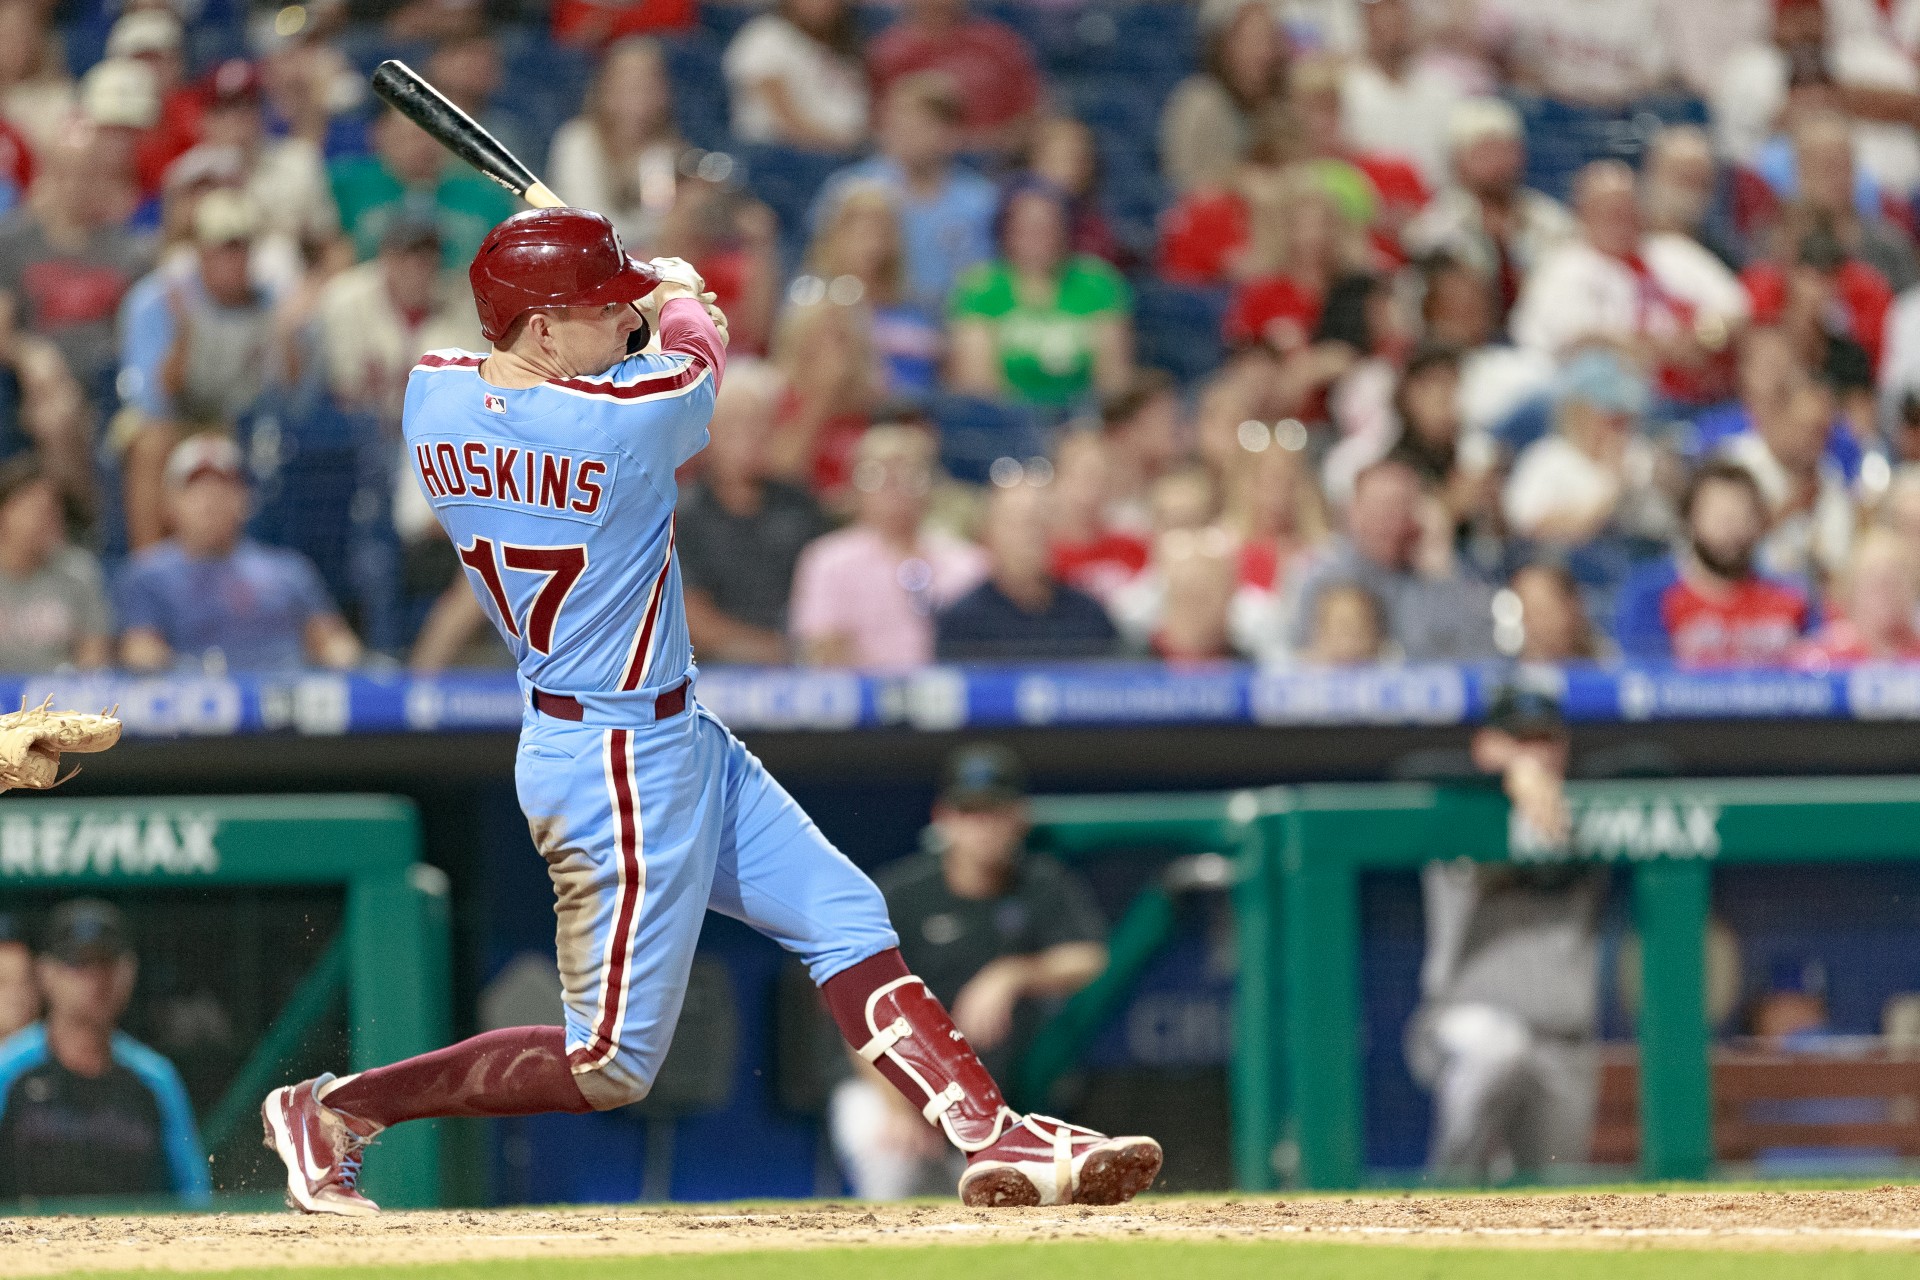 Rhys Hoskins is surging at the right time for the Phillies